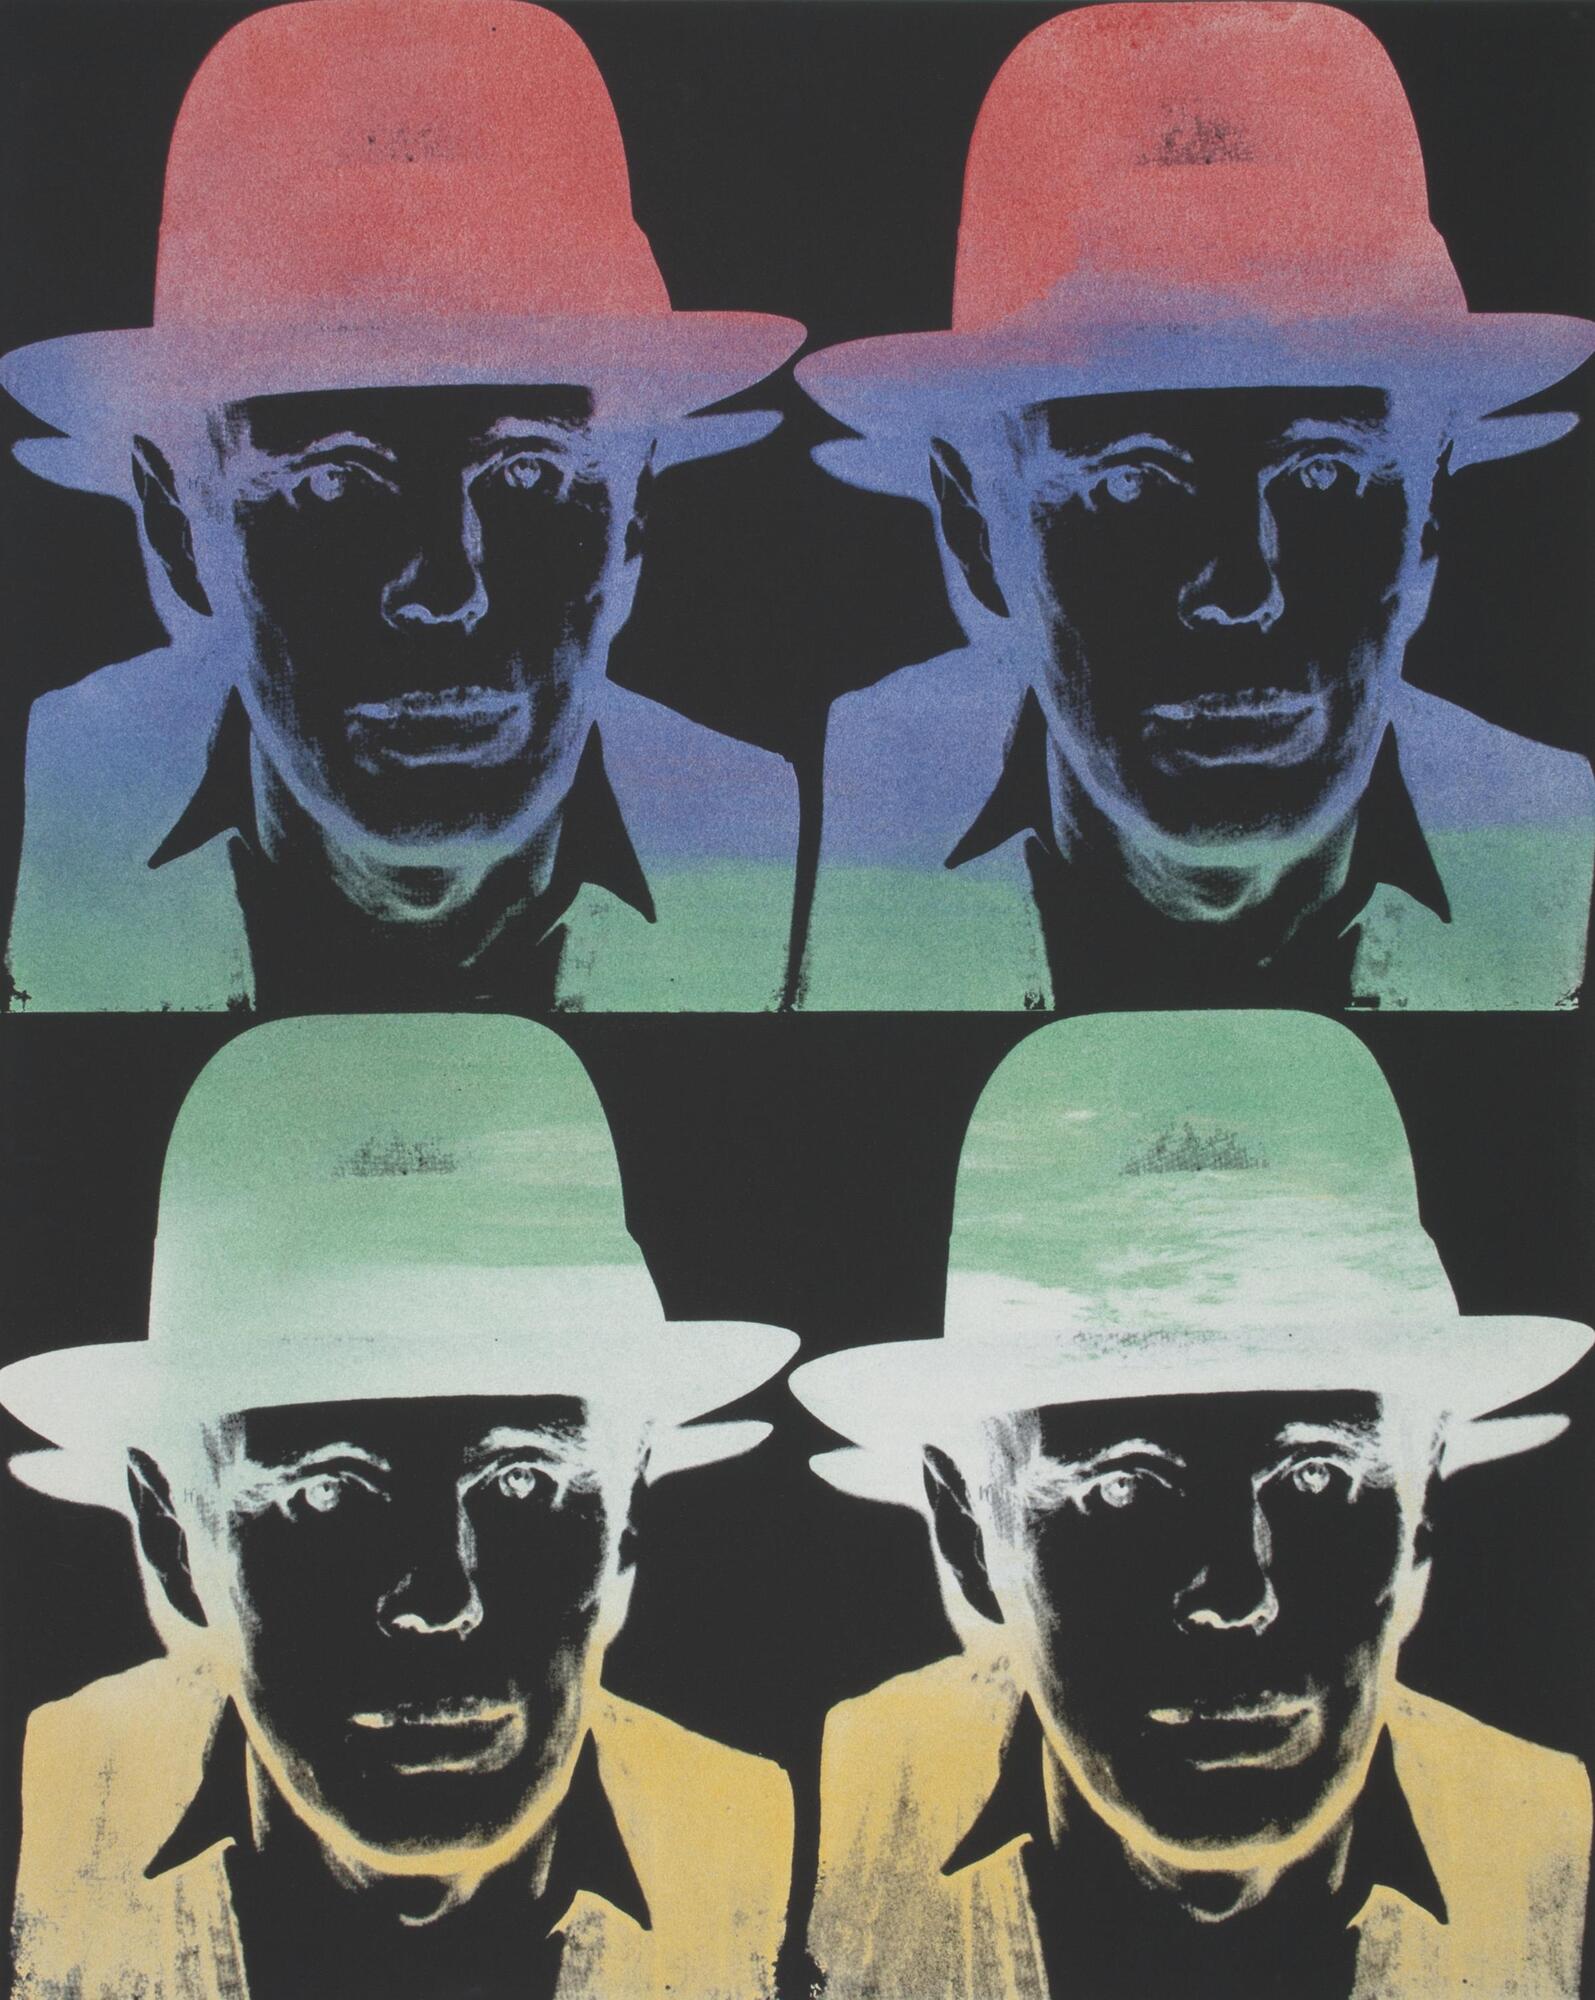 Four identical portraits, two by two, of a portrait of man wearing a cowboy hat. The upper two prints are black, purple, green and red, while the bottom two are yellow, green and white.